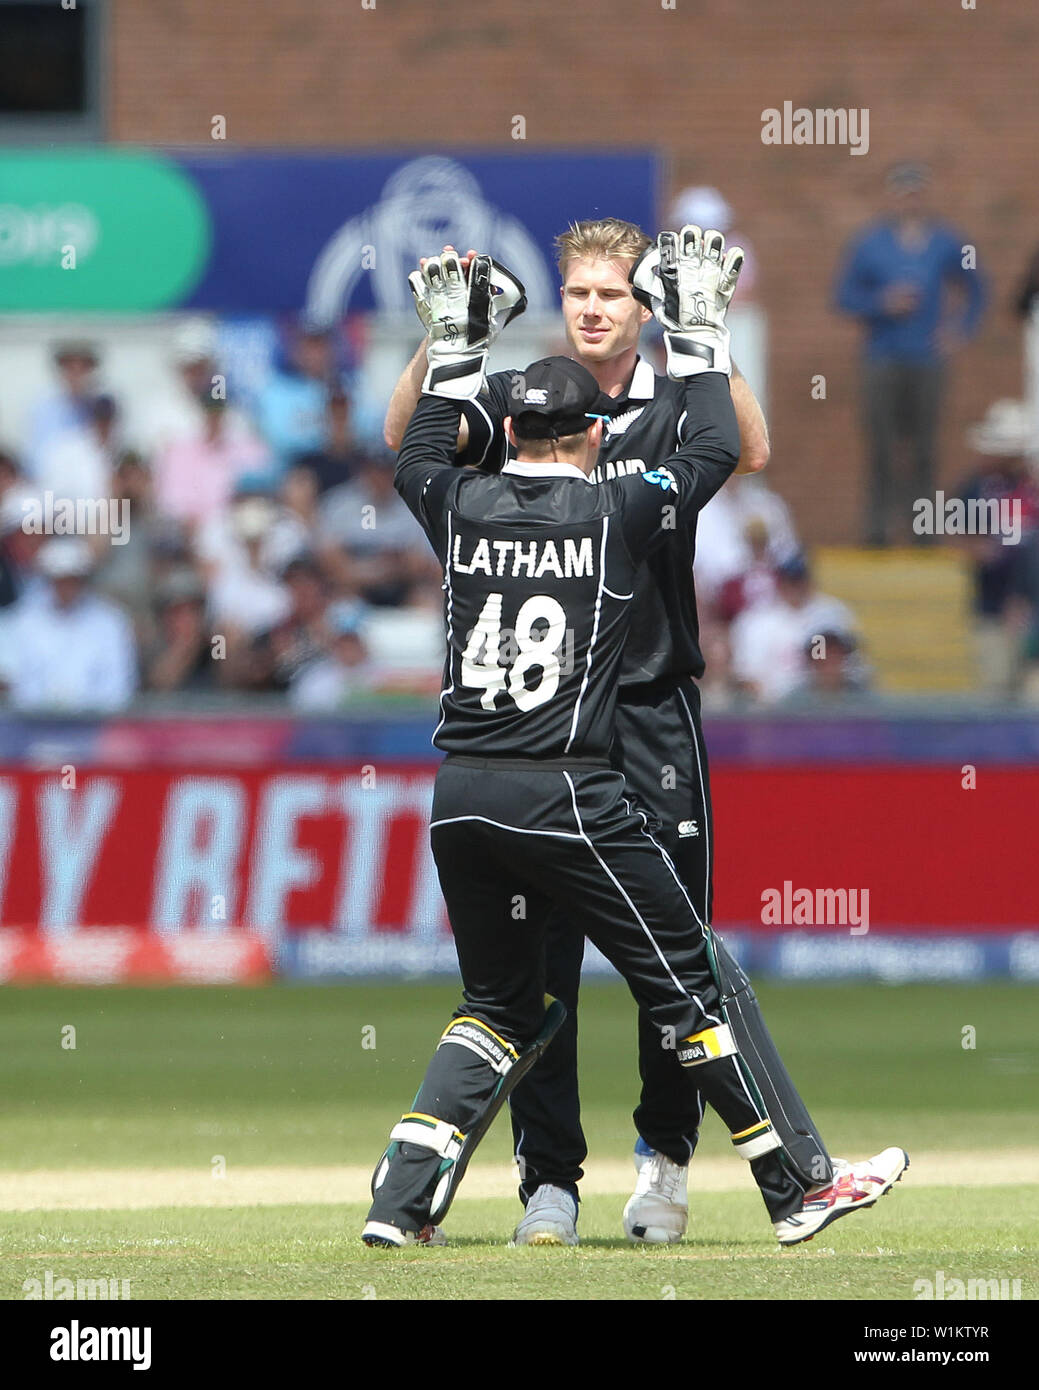 Chester le Street, Co Durham, UK. 3rd July 2019. New Zealand's James Neesham and Tom Latham celebrates after Neesham claimed the wicket of Jason Roy during the ICC Cricket World Cup 2019 match between England and New Zealand at Emirates Riverside, Chester le Street on Wednesday 3rd July 2019. (Credit: Mark Fletcher | MI News) Credit: MI News & Sport /Alamy Live News Stock Photo